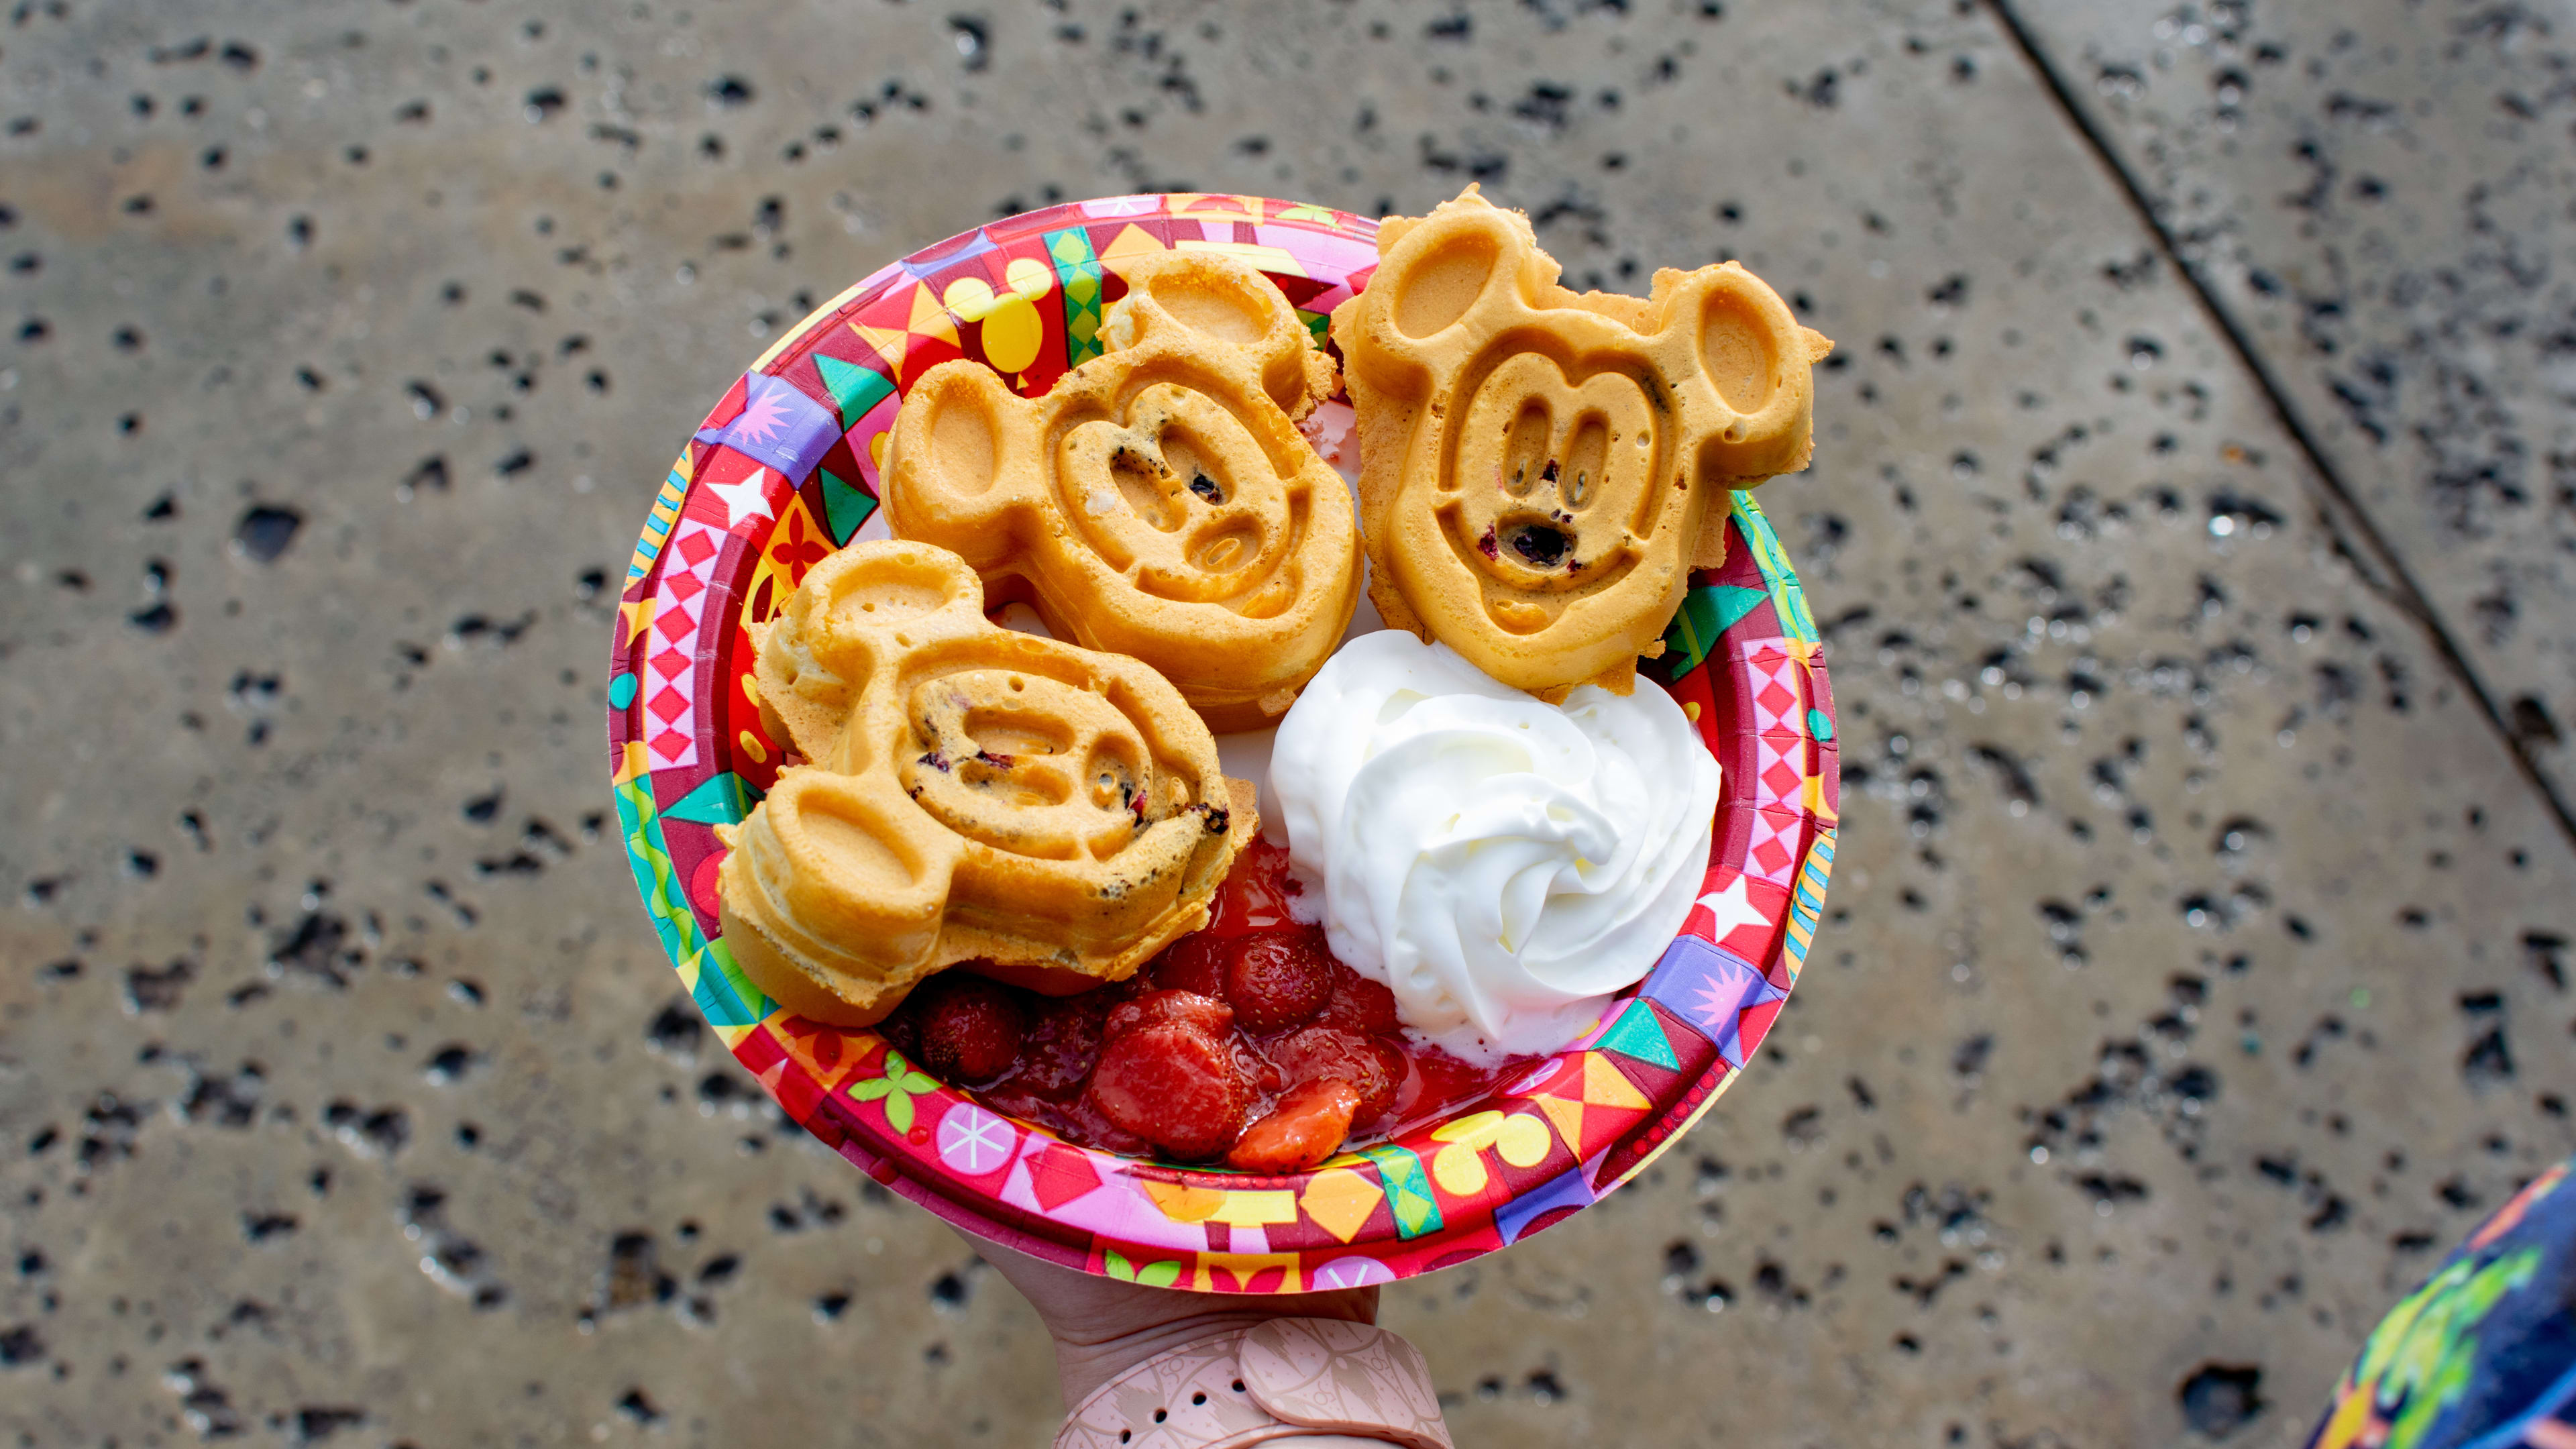 A plate of Mickey waffles.